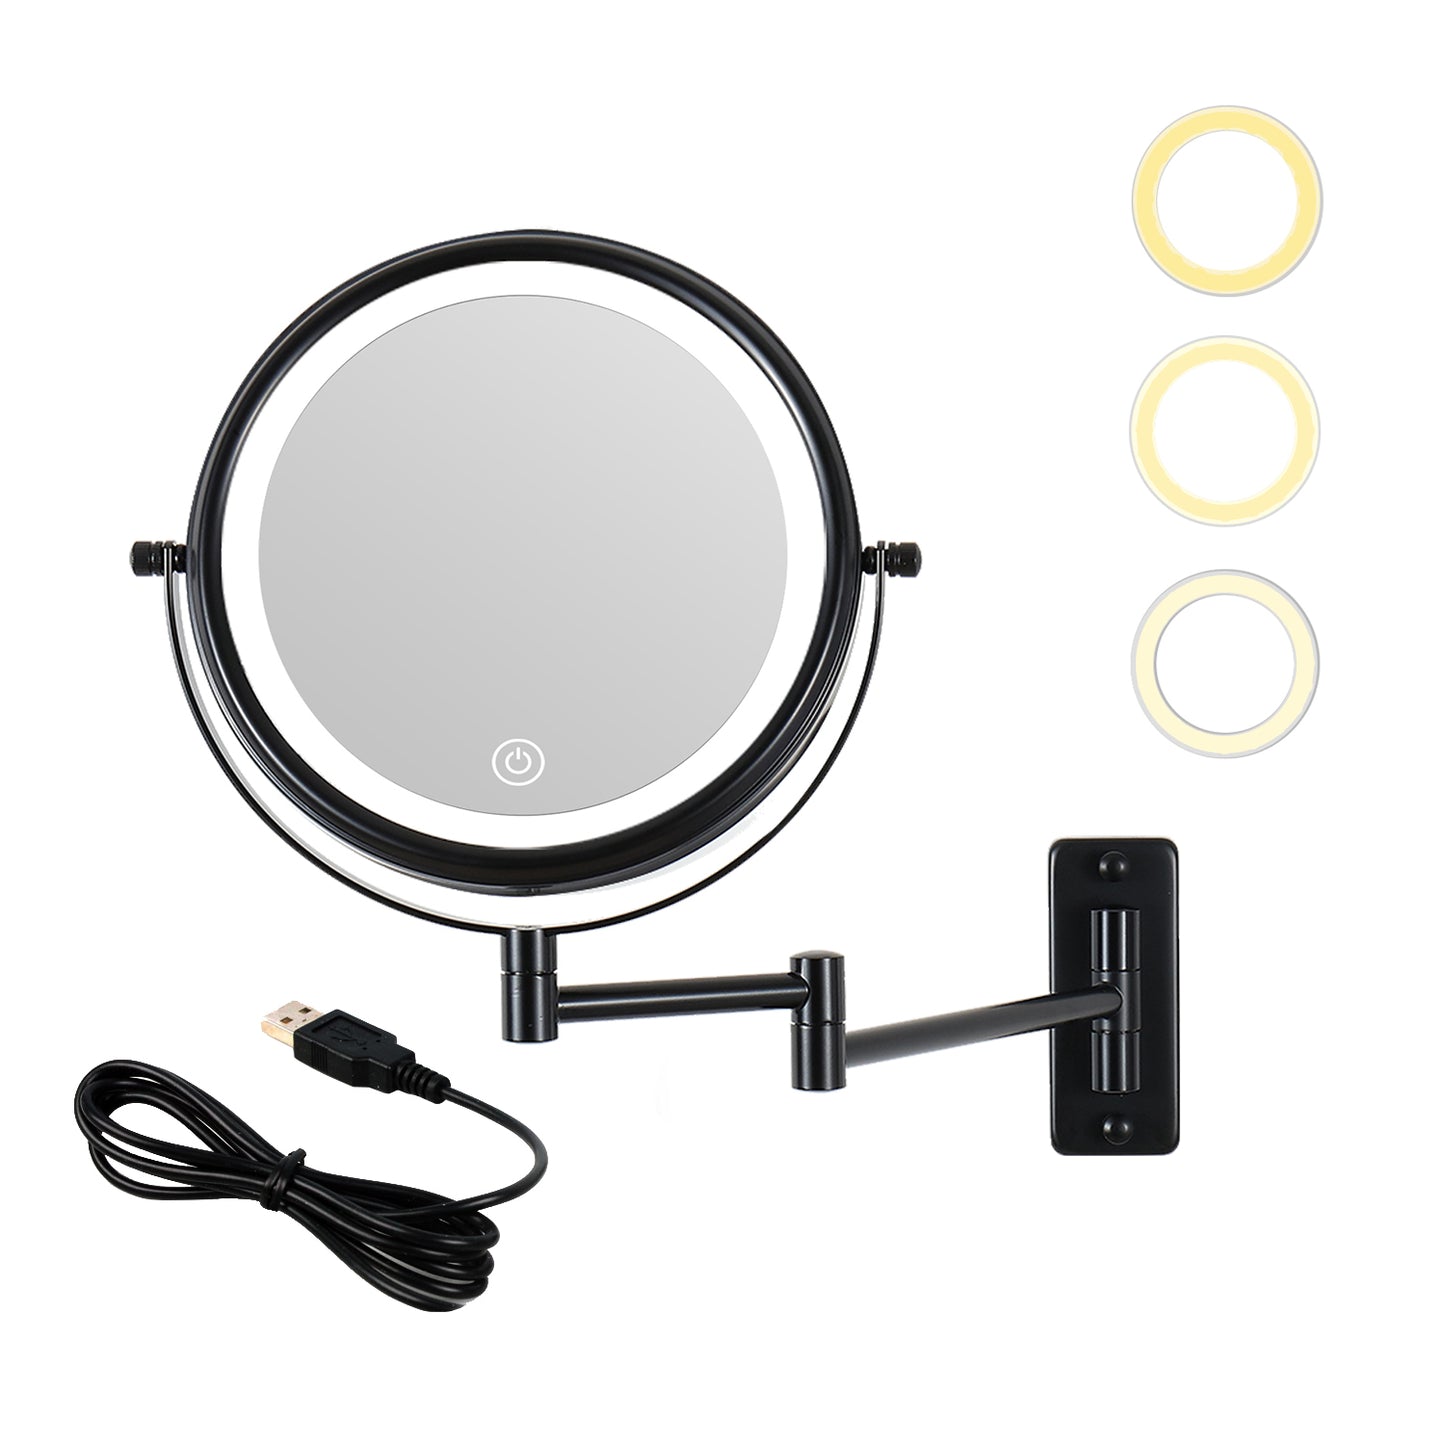 8-inch Wall Mounted Makeup Vanity Mirror, 3 colors Led lights, 1X/10X Magnification Mirror, 360° Swivel with Extension Arm (Black)